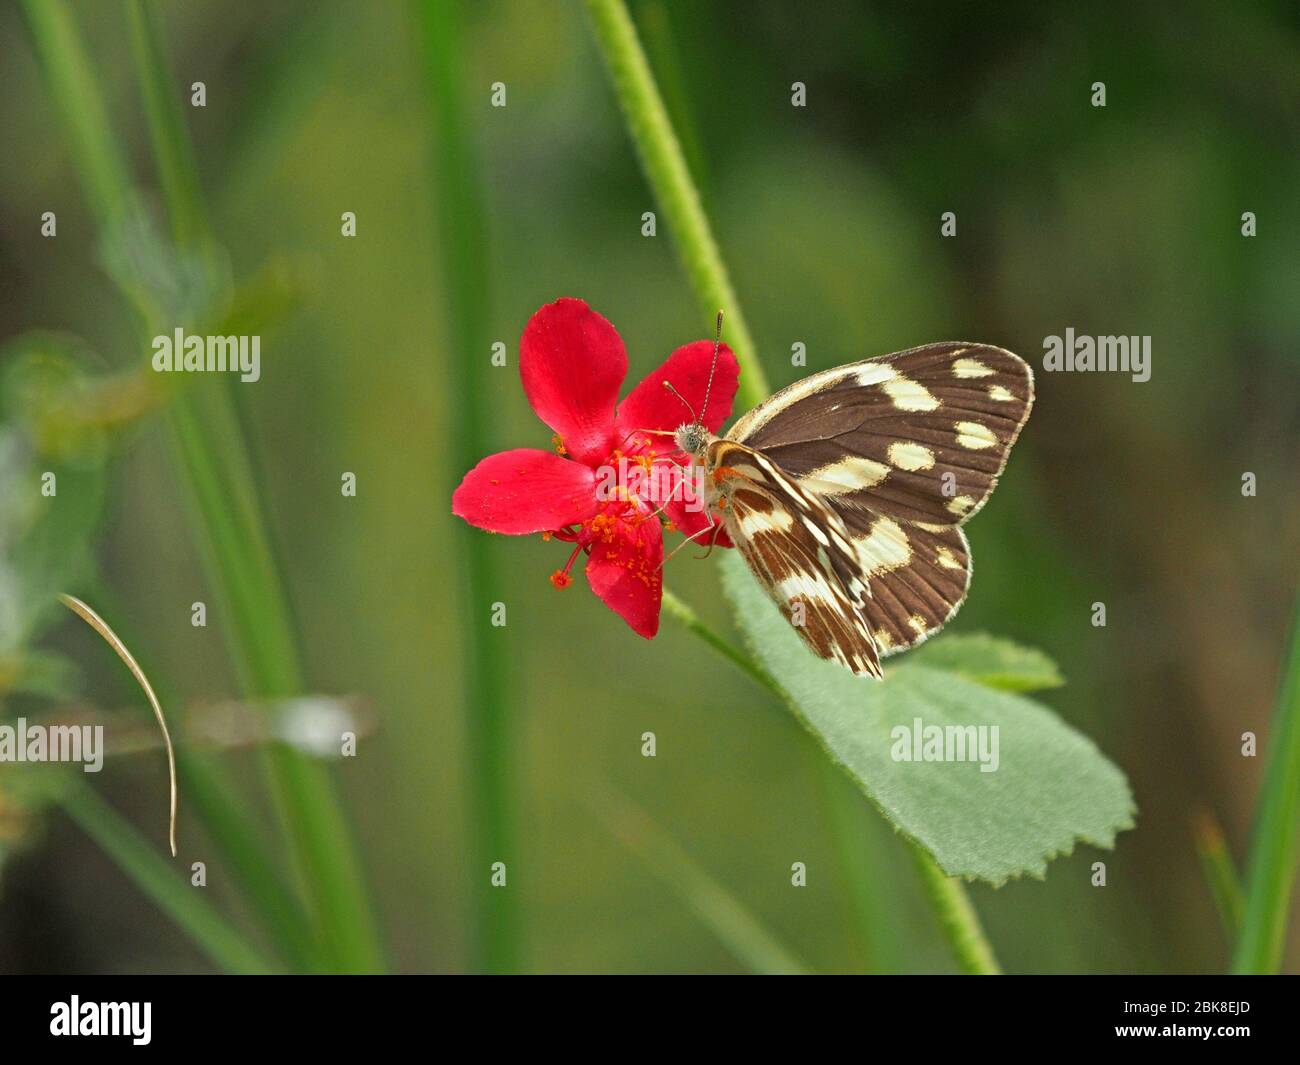 beautiful butterfly siping nectar from red flower with patterned black and white wings spread in Ol Pejeta Conservancy, Laikipia, Kenya, Africa Stock Photo